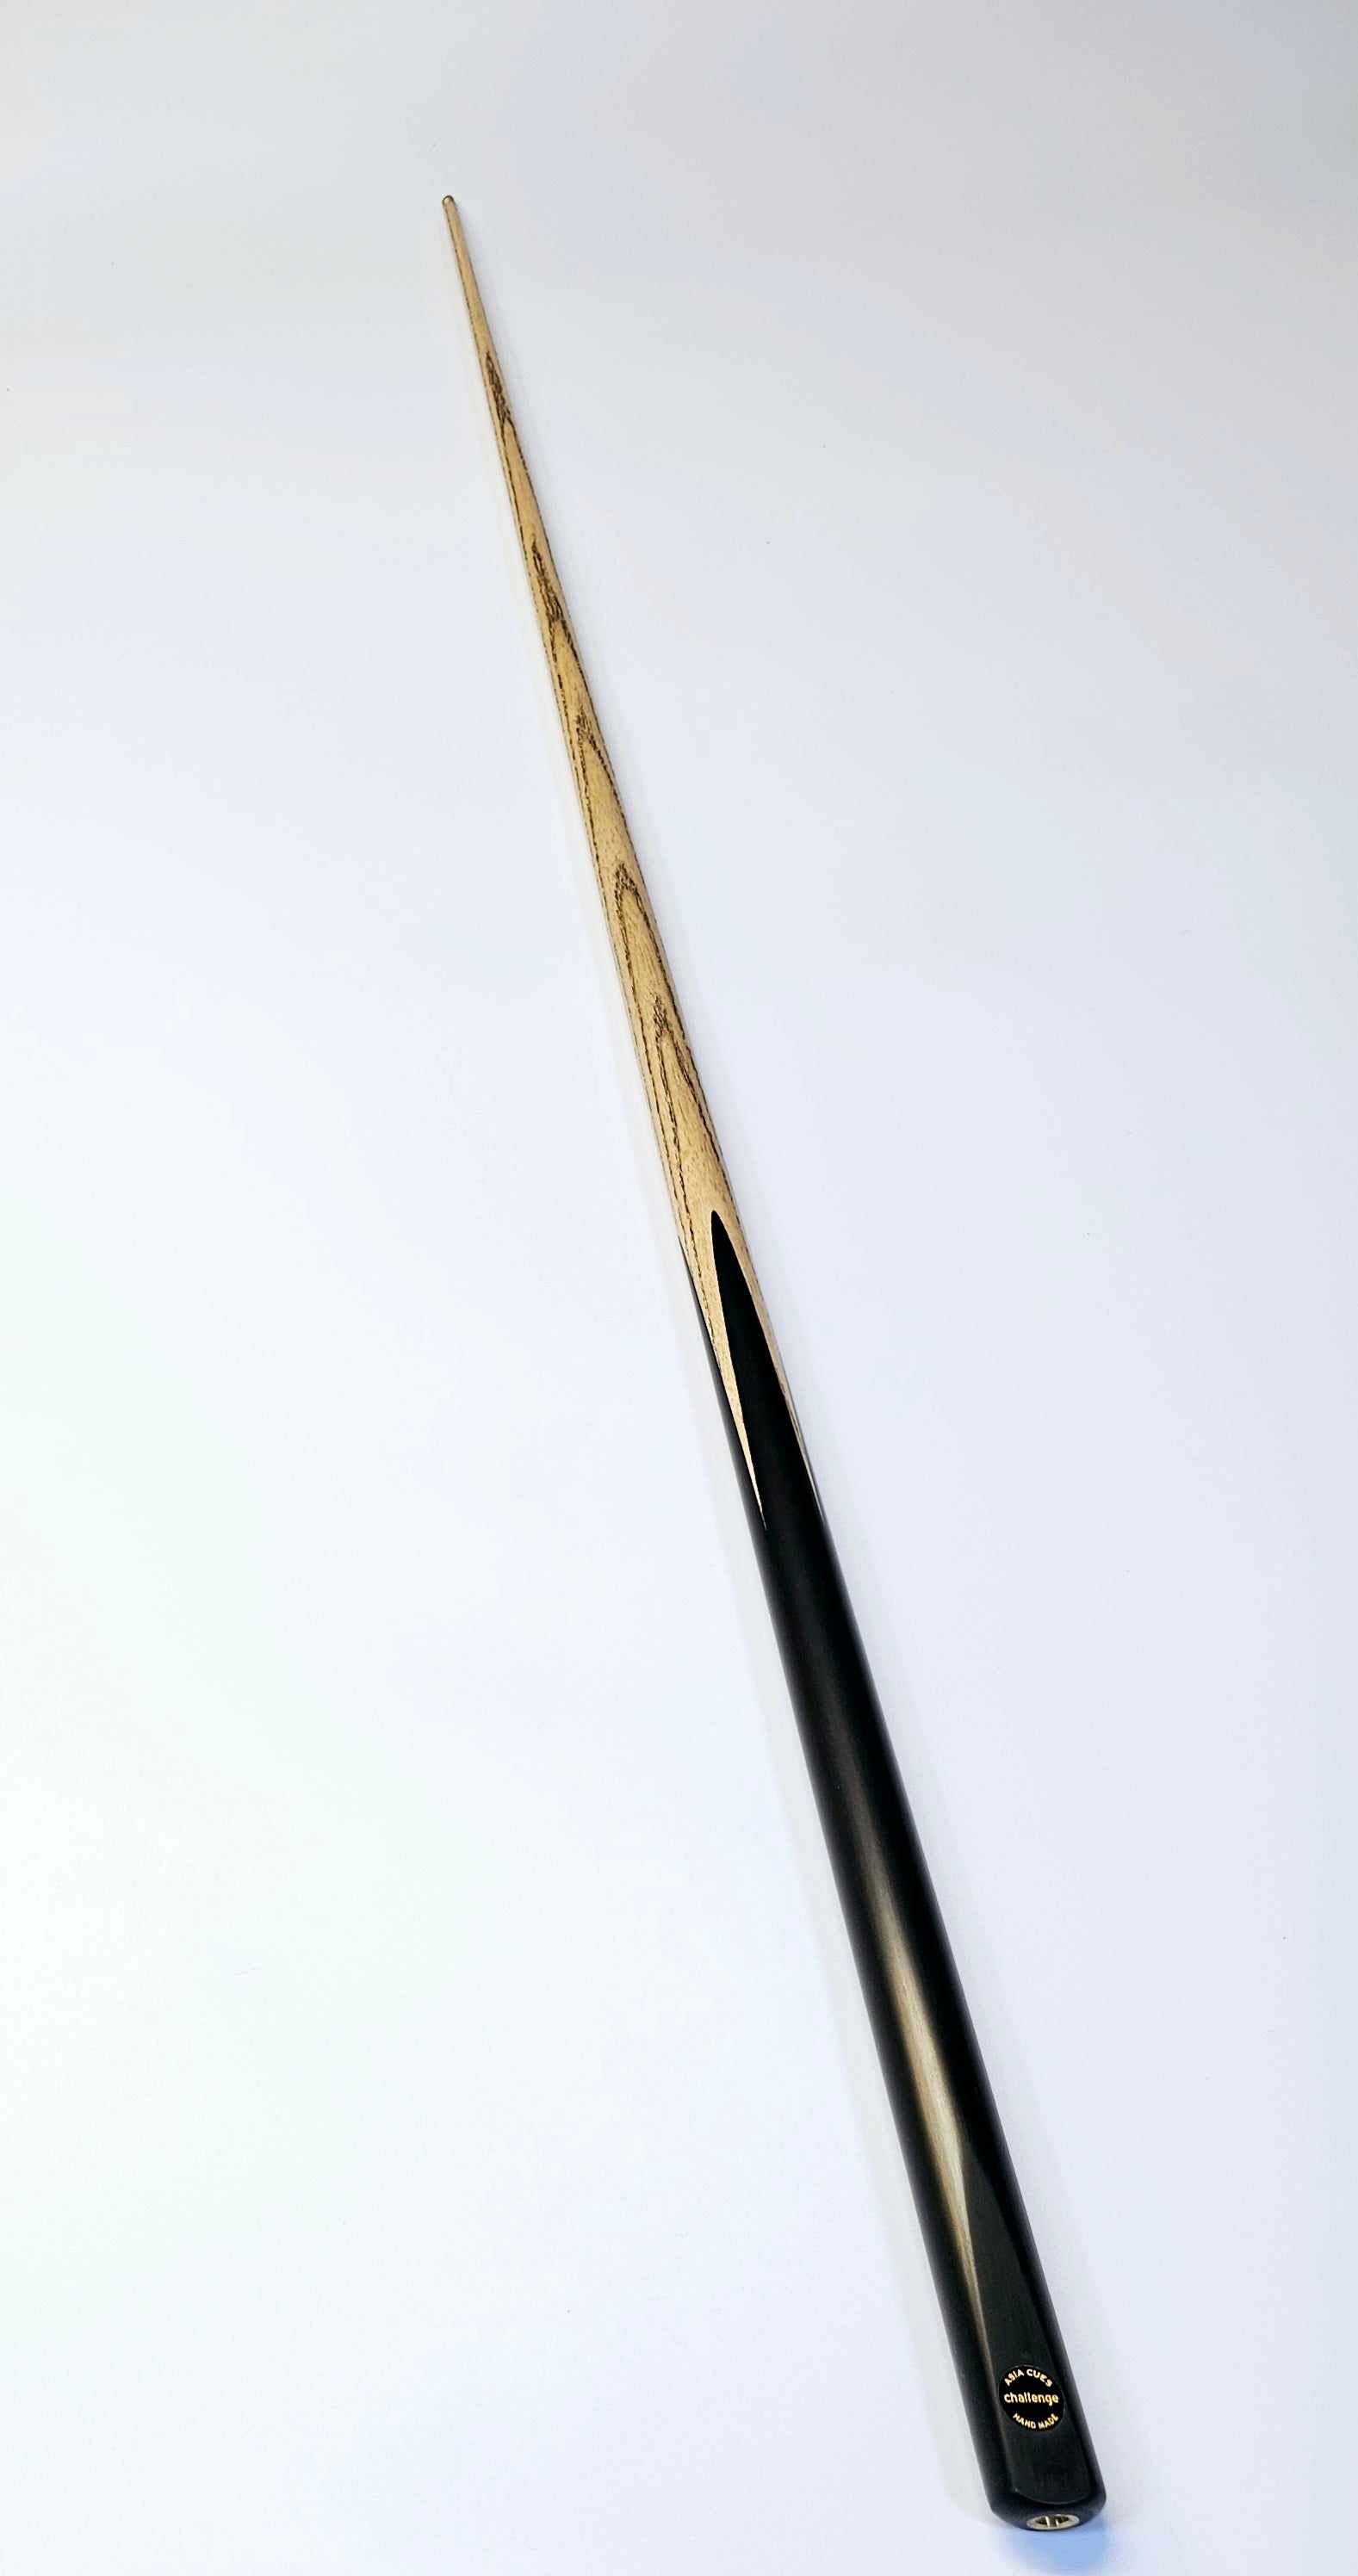 Asia Cues Challenge - One Piece Pool Cue 8.7mm Tip, 17.1oz, 57"